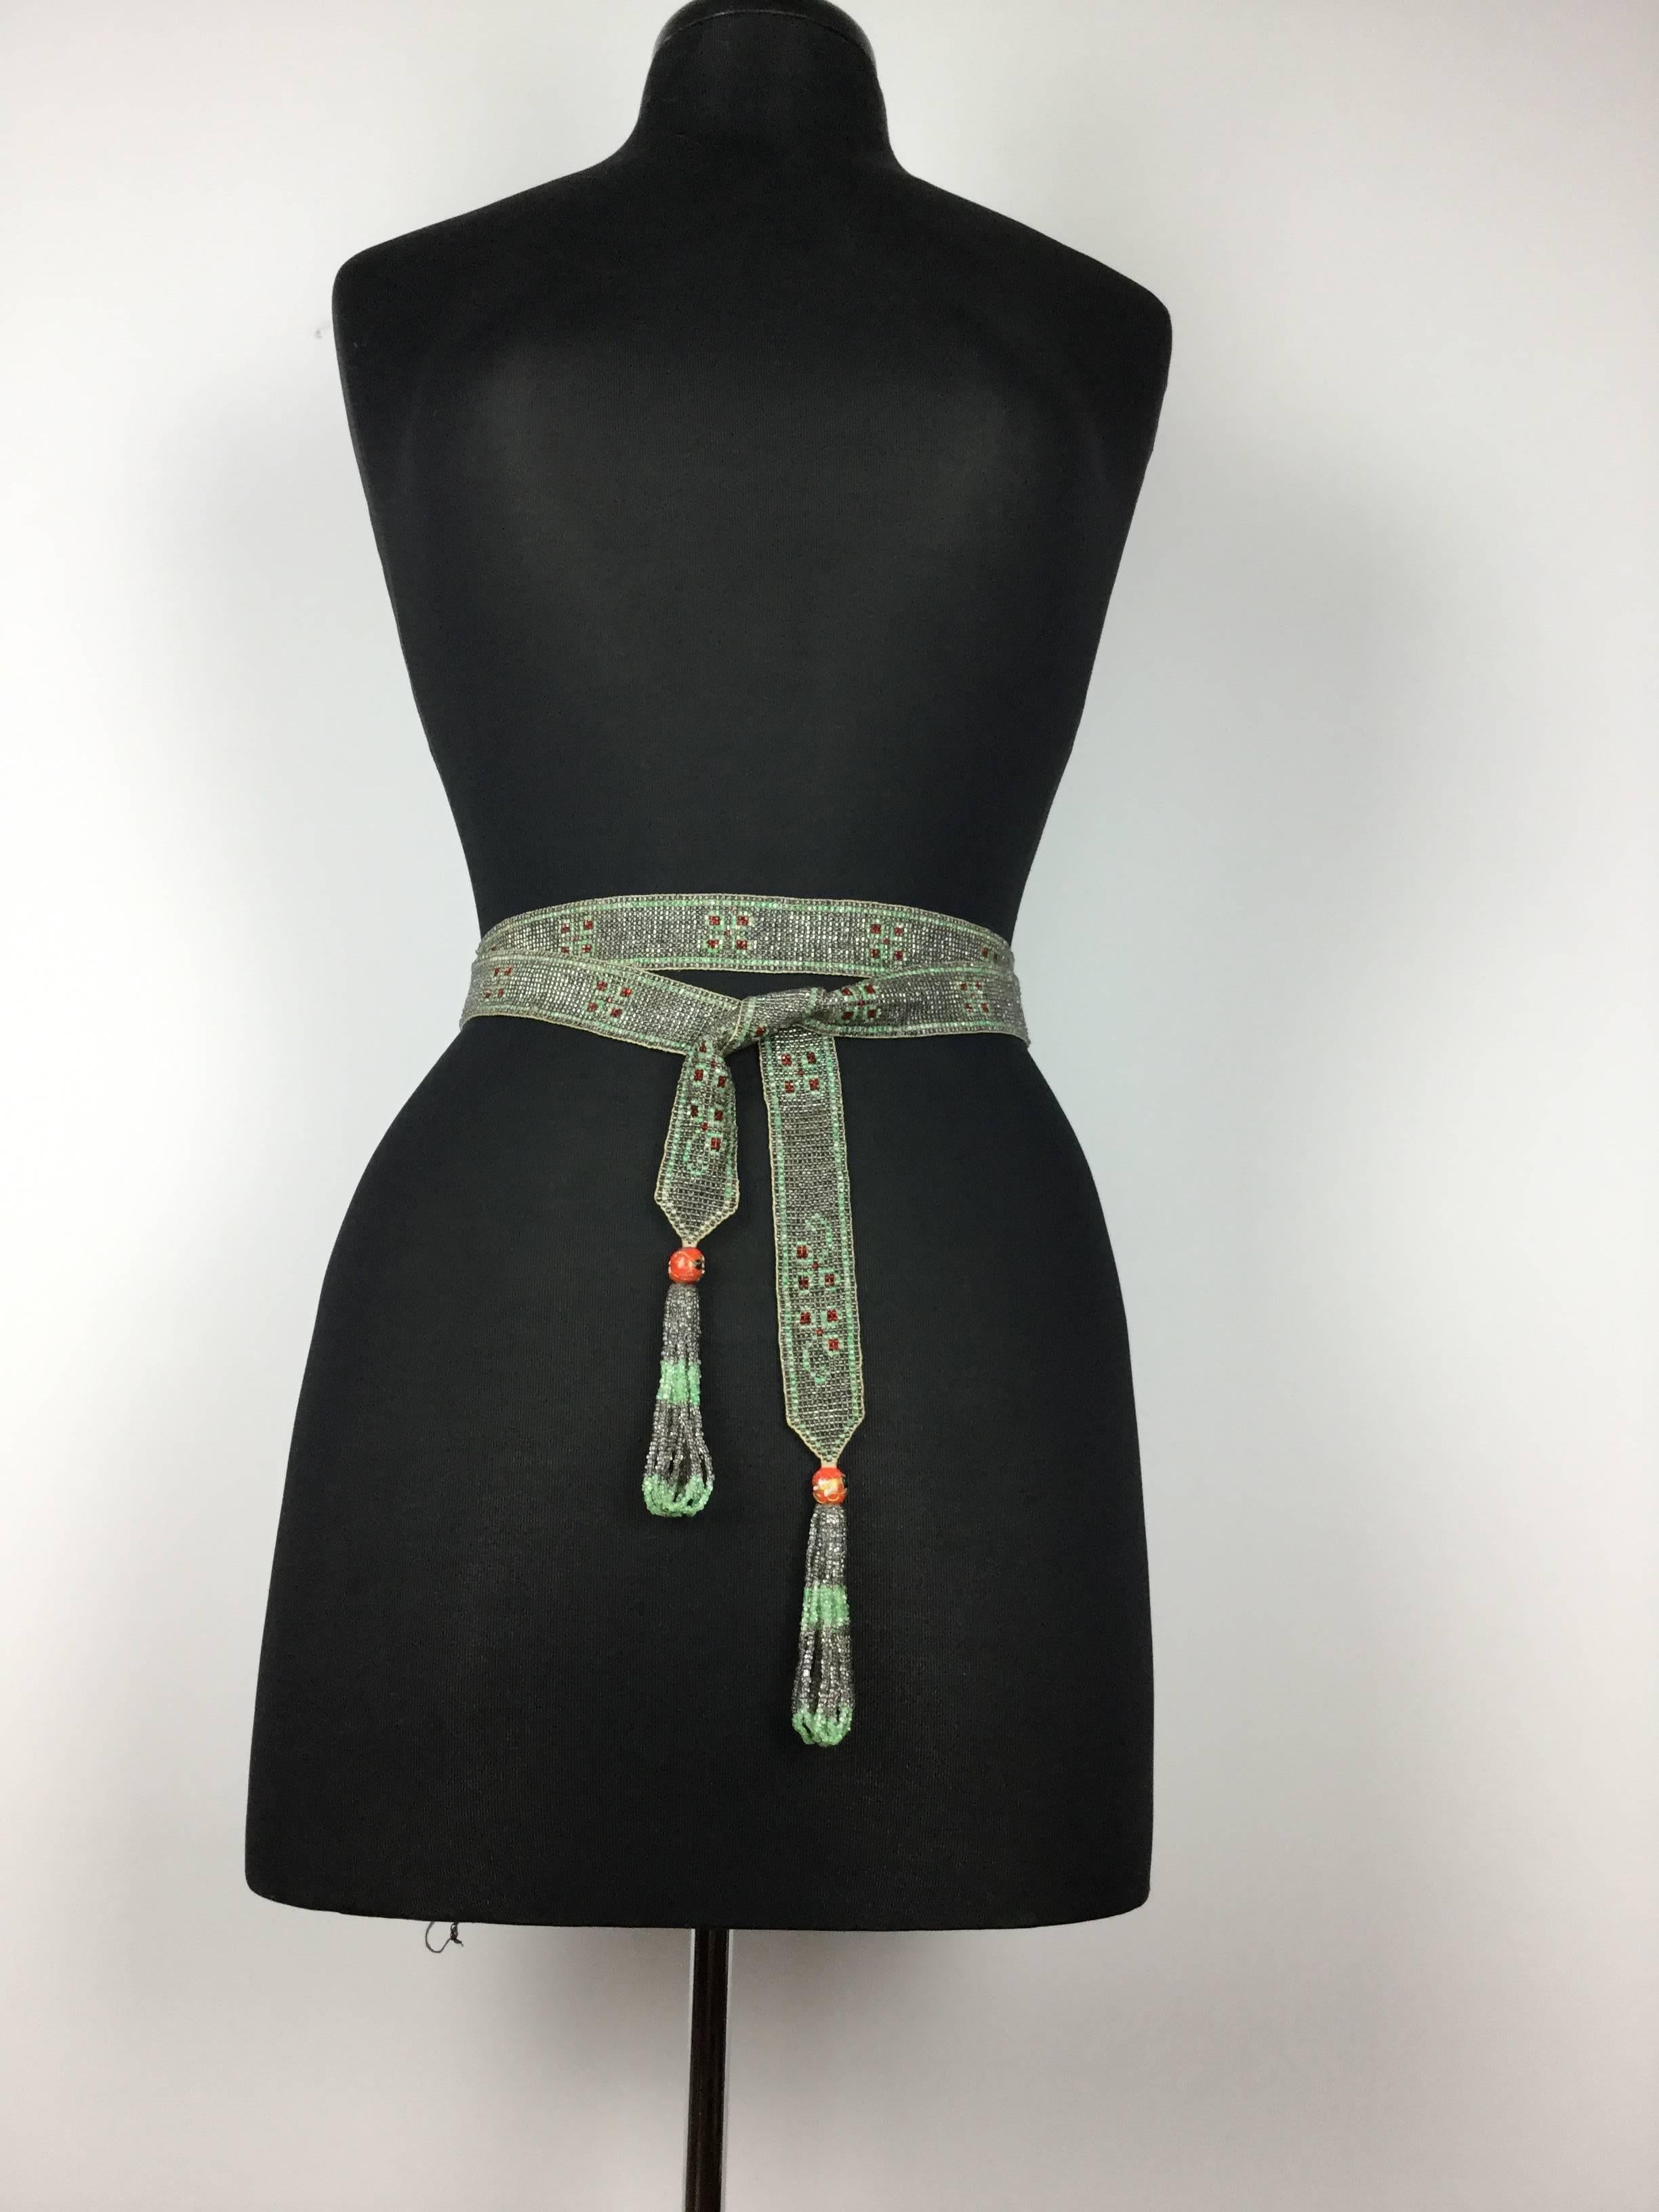 
Simply gorgeous woven Art Deco seed bead piece of the highest quality that can be worn in so many ways!

It's great as a belt either doubled over at the waist or worn low slung in a single 
knot. 

As a necklace is works both as a long